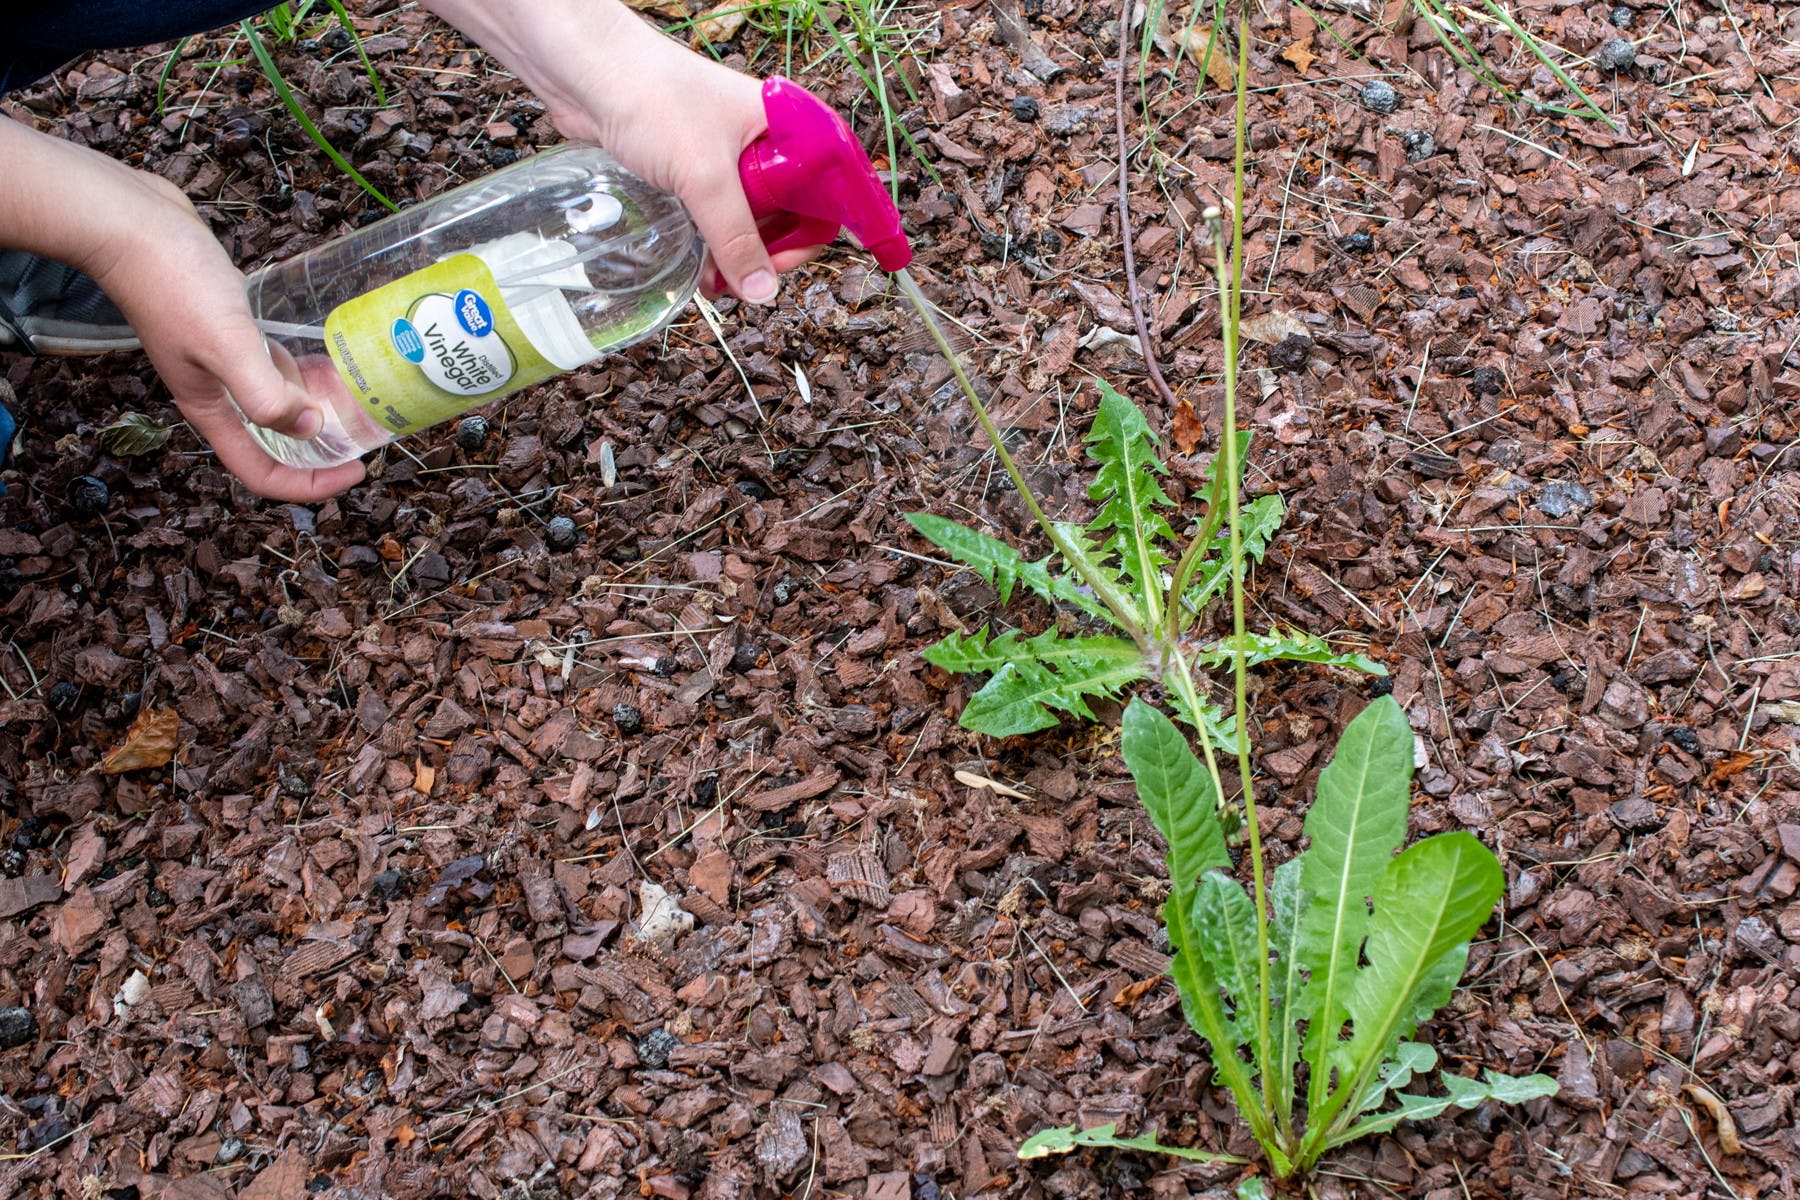 10 Homemade Weed Killers That Actually Work